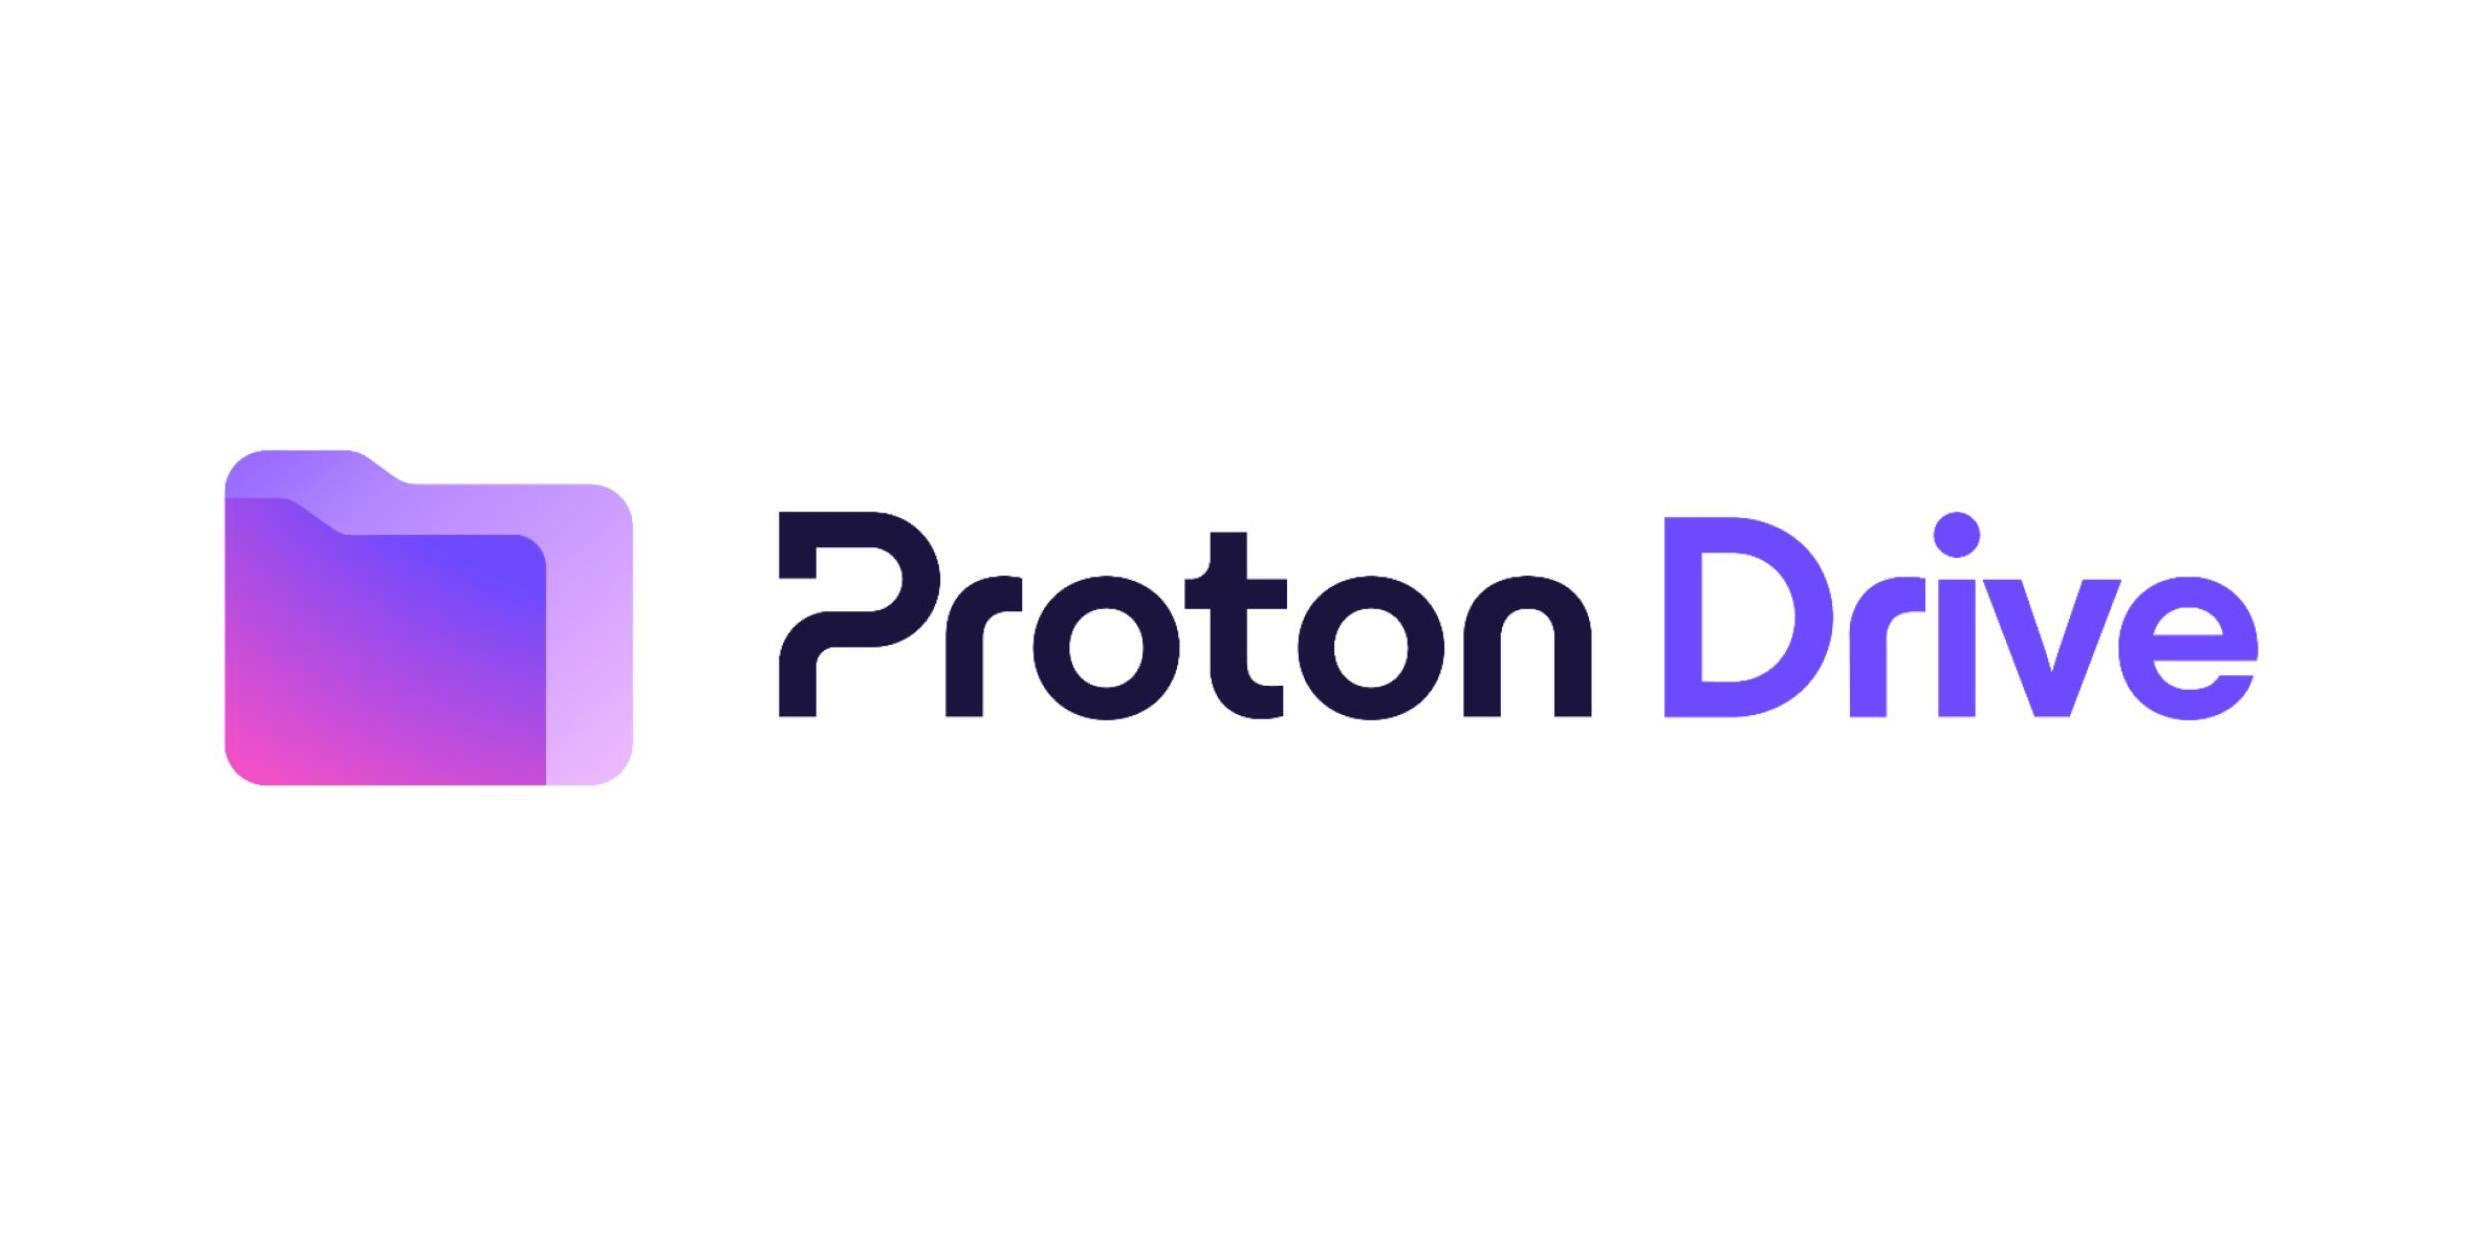 How to Fix "Cannot Upload: File No Longer Exists" Error on Proton Drive ? 7